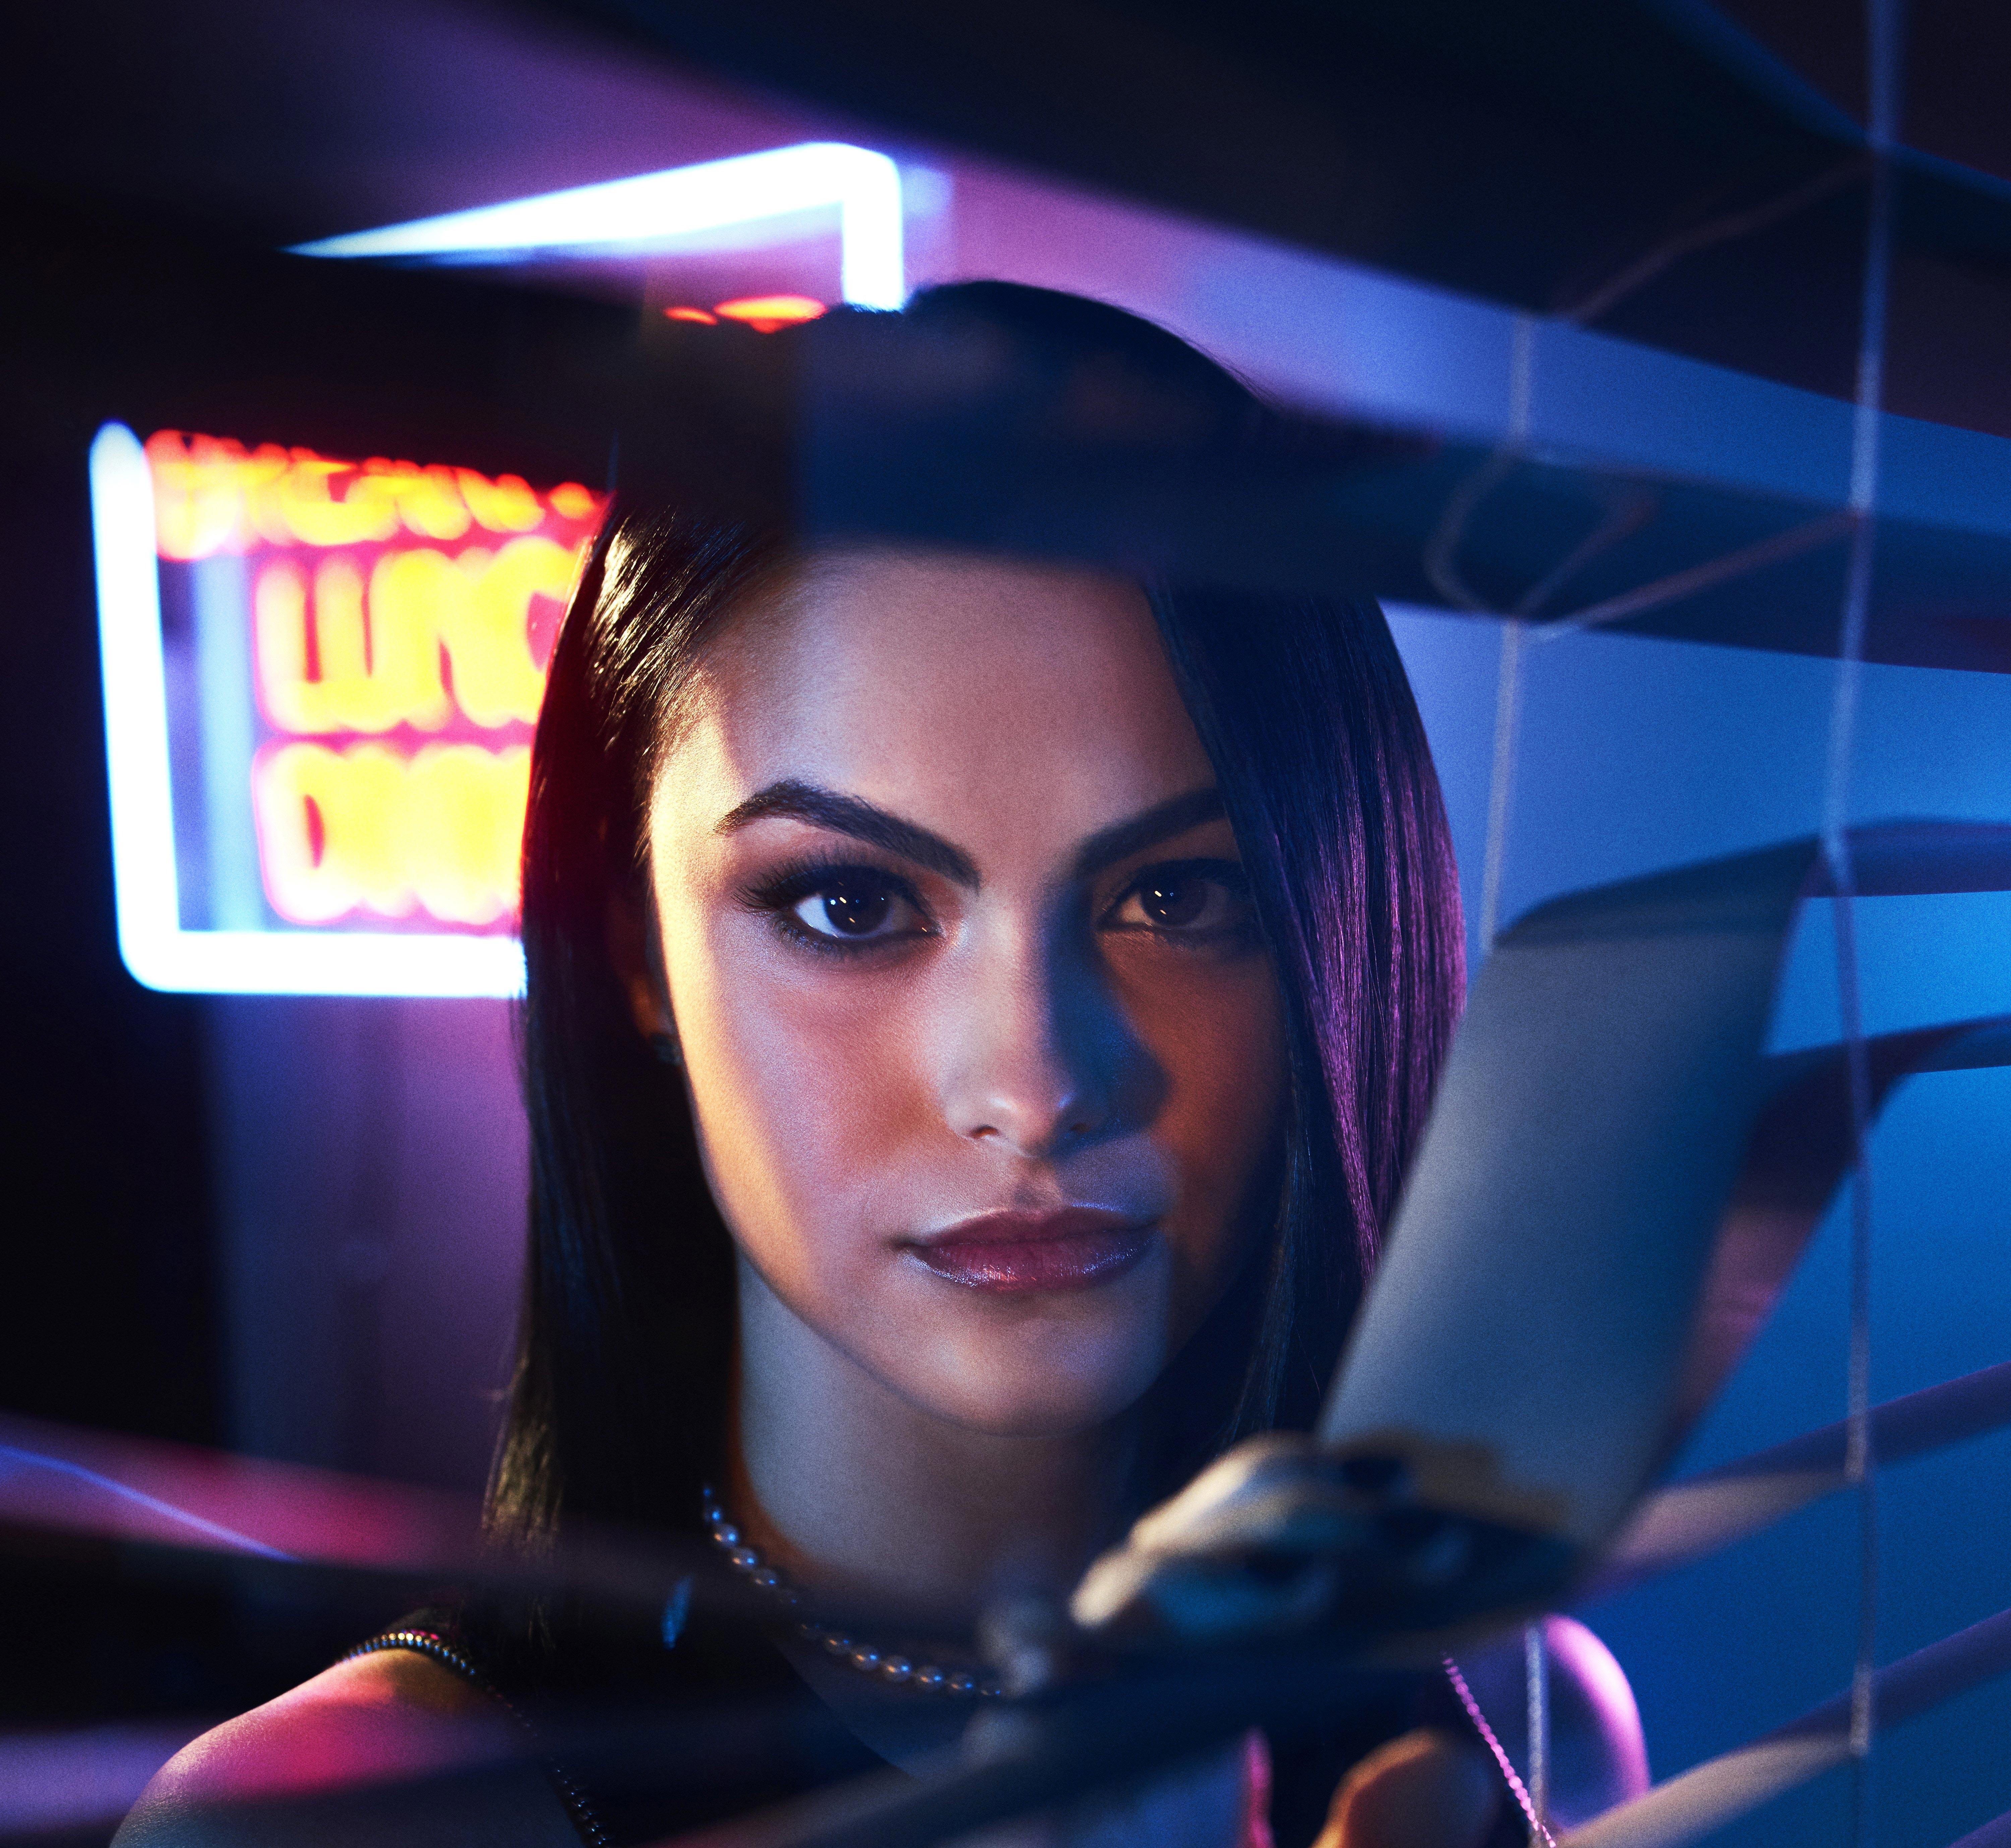 Camila Mendes As Veronica Lodge In Riverdale 5k, HD Tv Shows